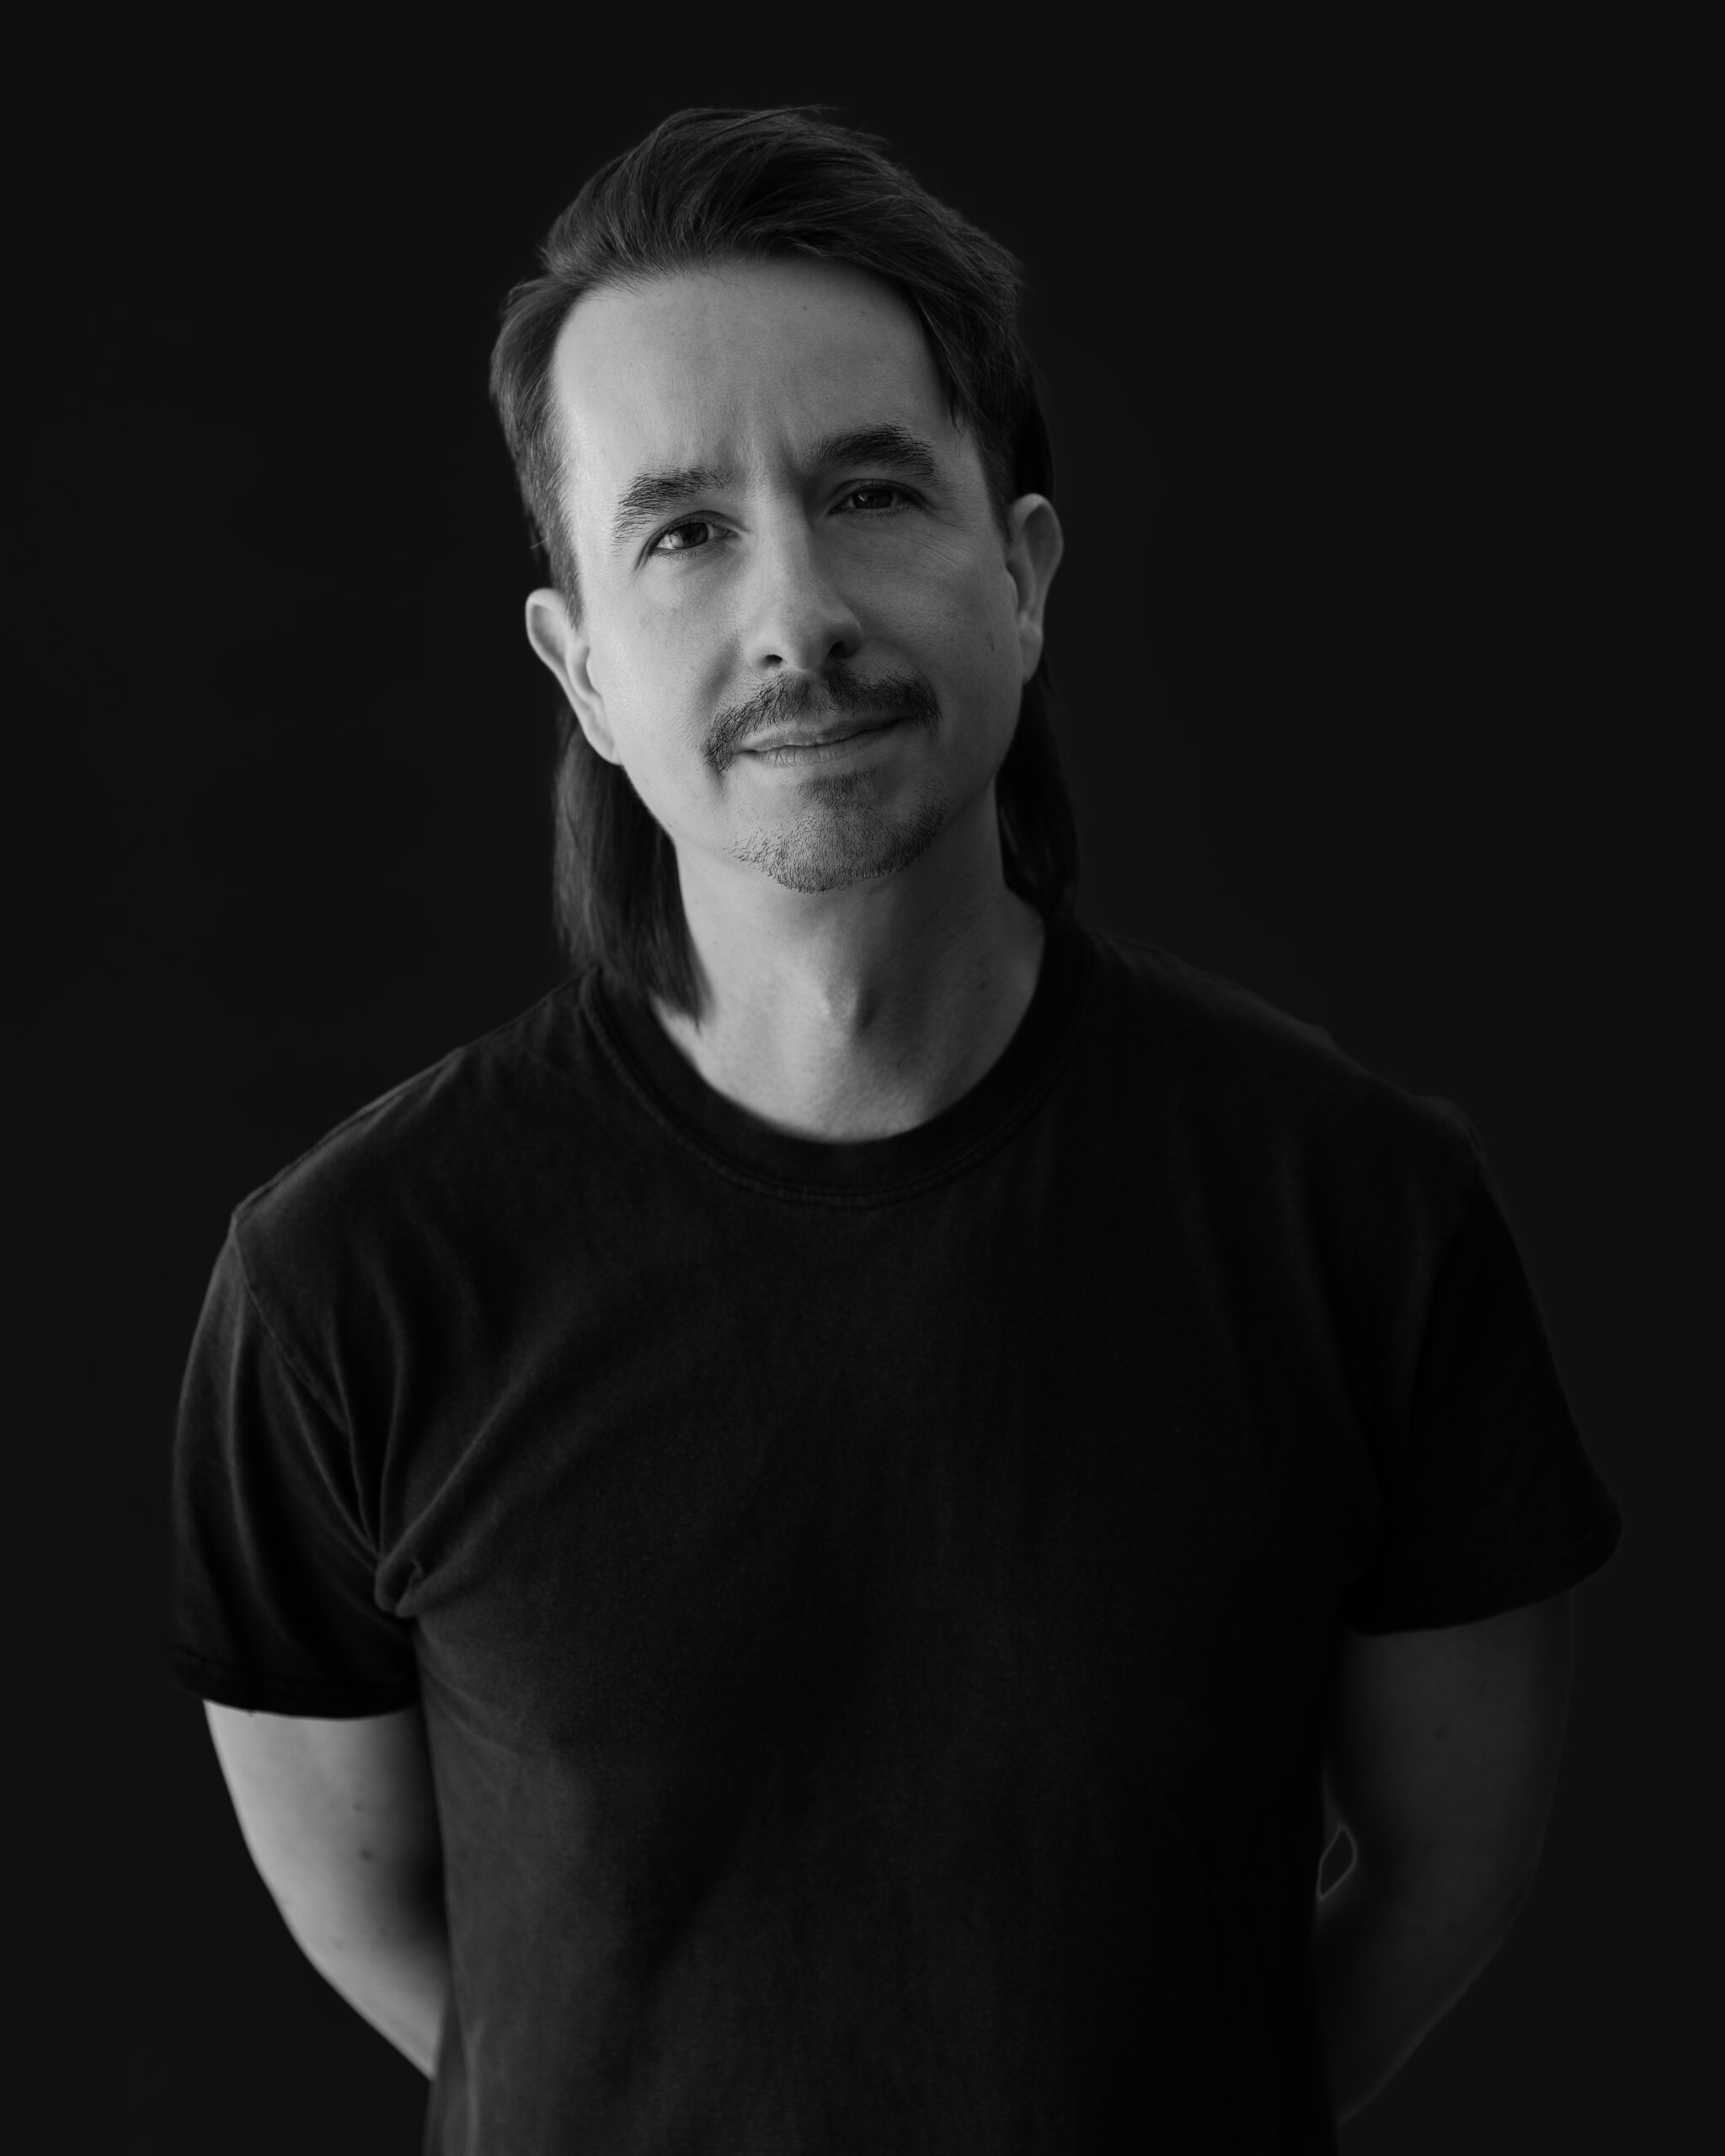 Black-and-white portrait of Spencer Gordon. He has light skin tone and dark eyes, hair, and eyebrows. He is wearing a dark t-shirt. His arms are held behind his back.